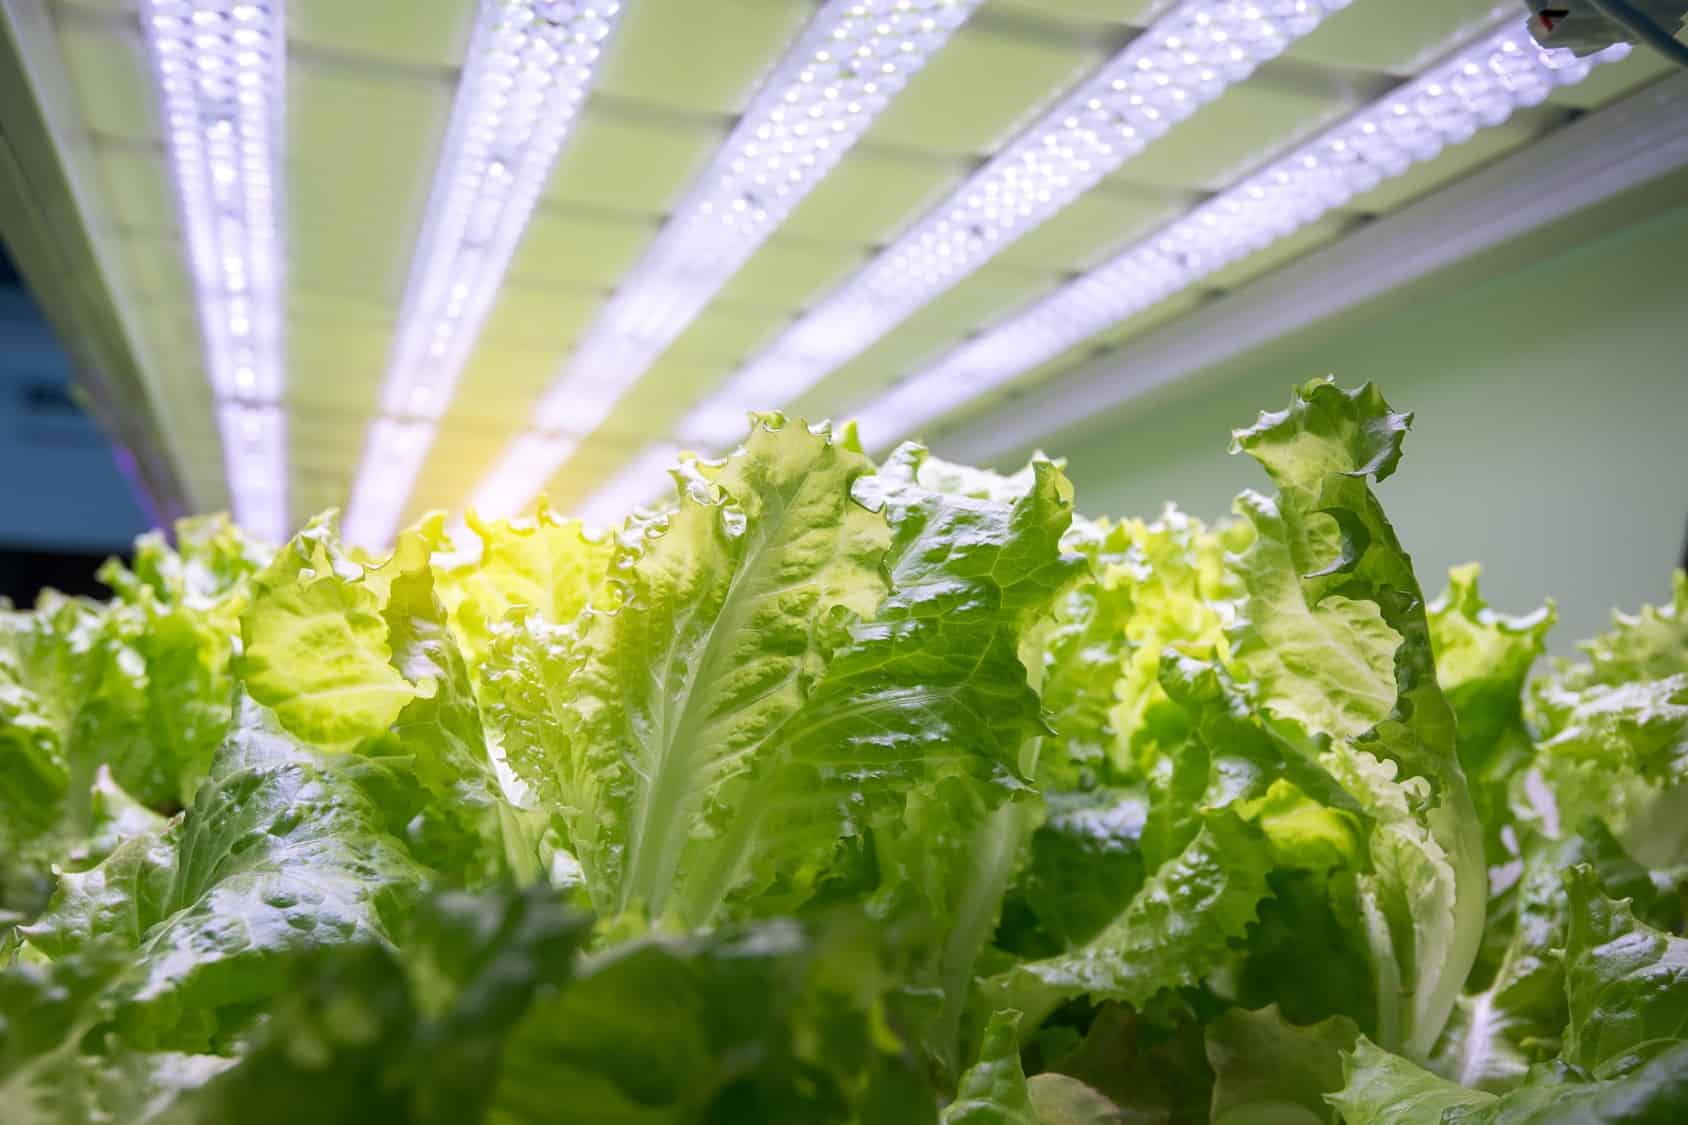 How To Store Hydroponic Lettuce